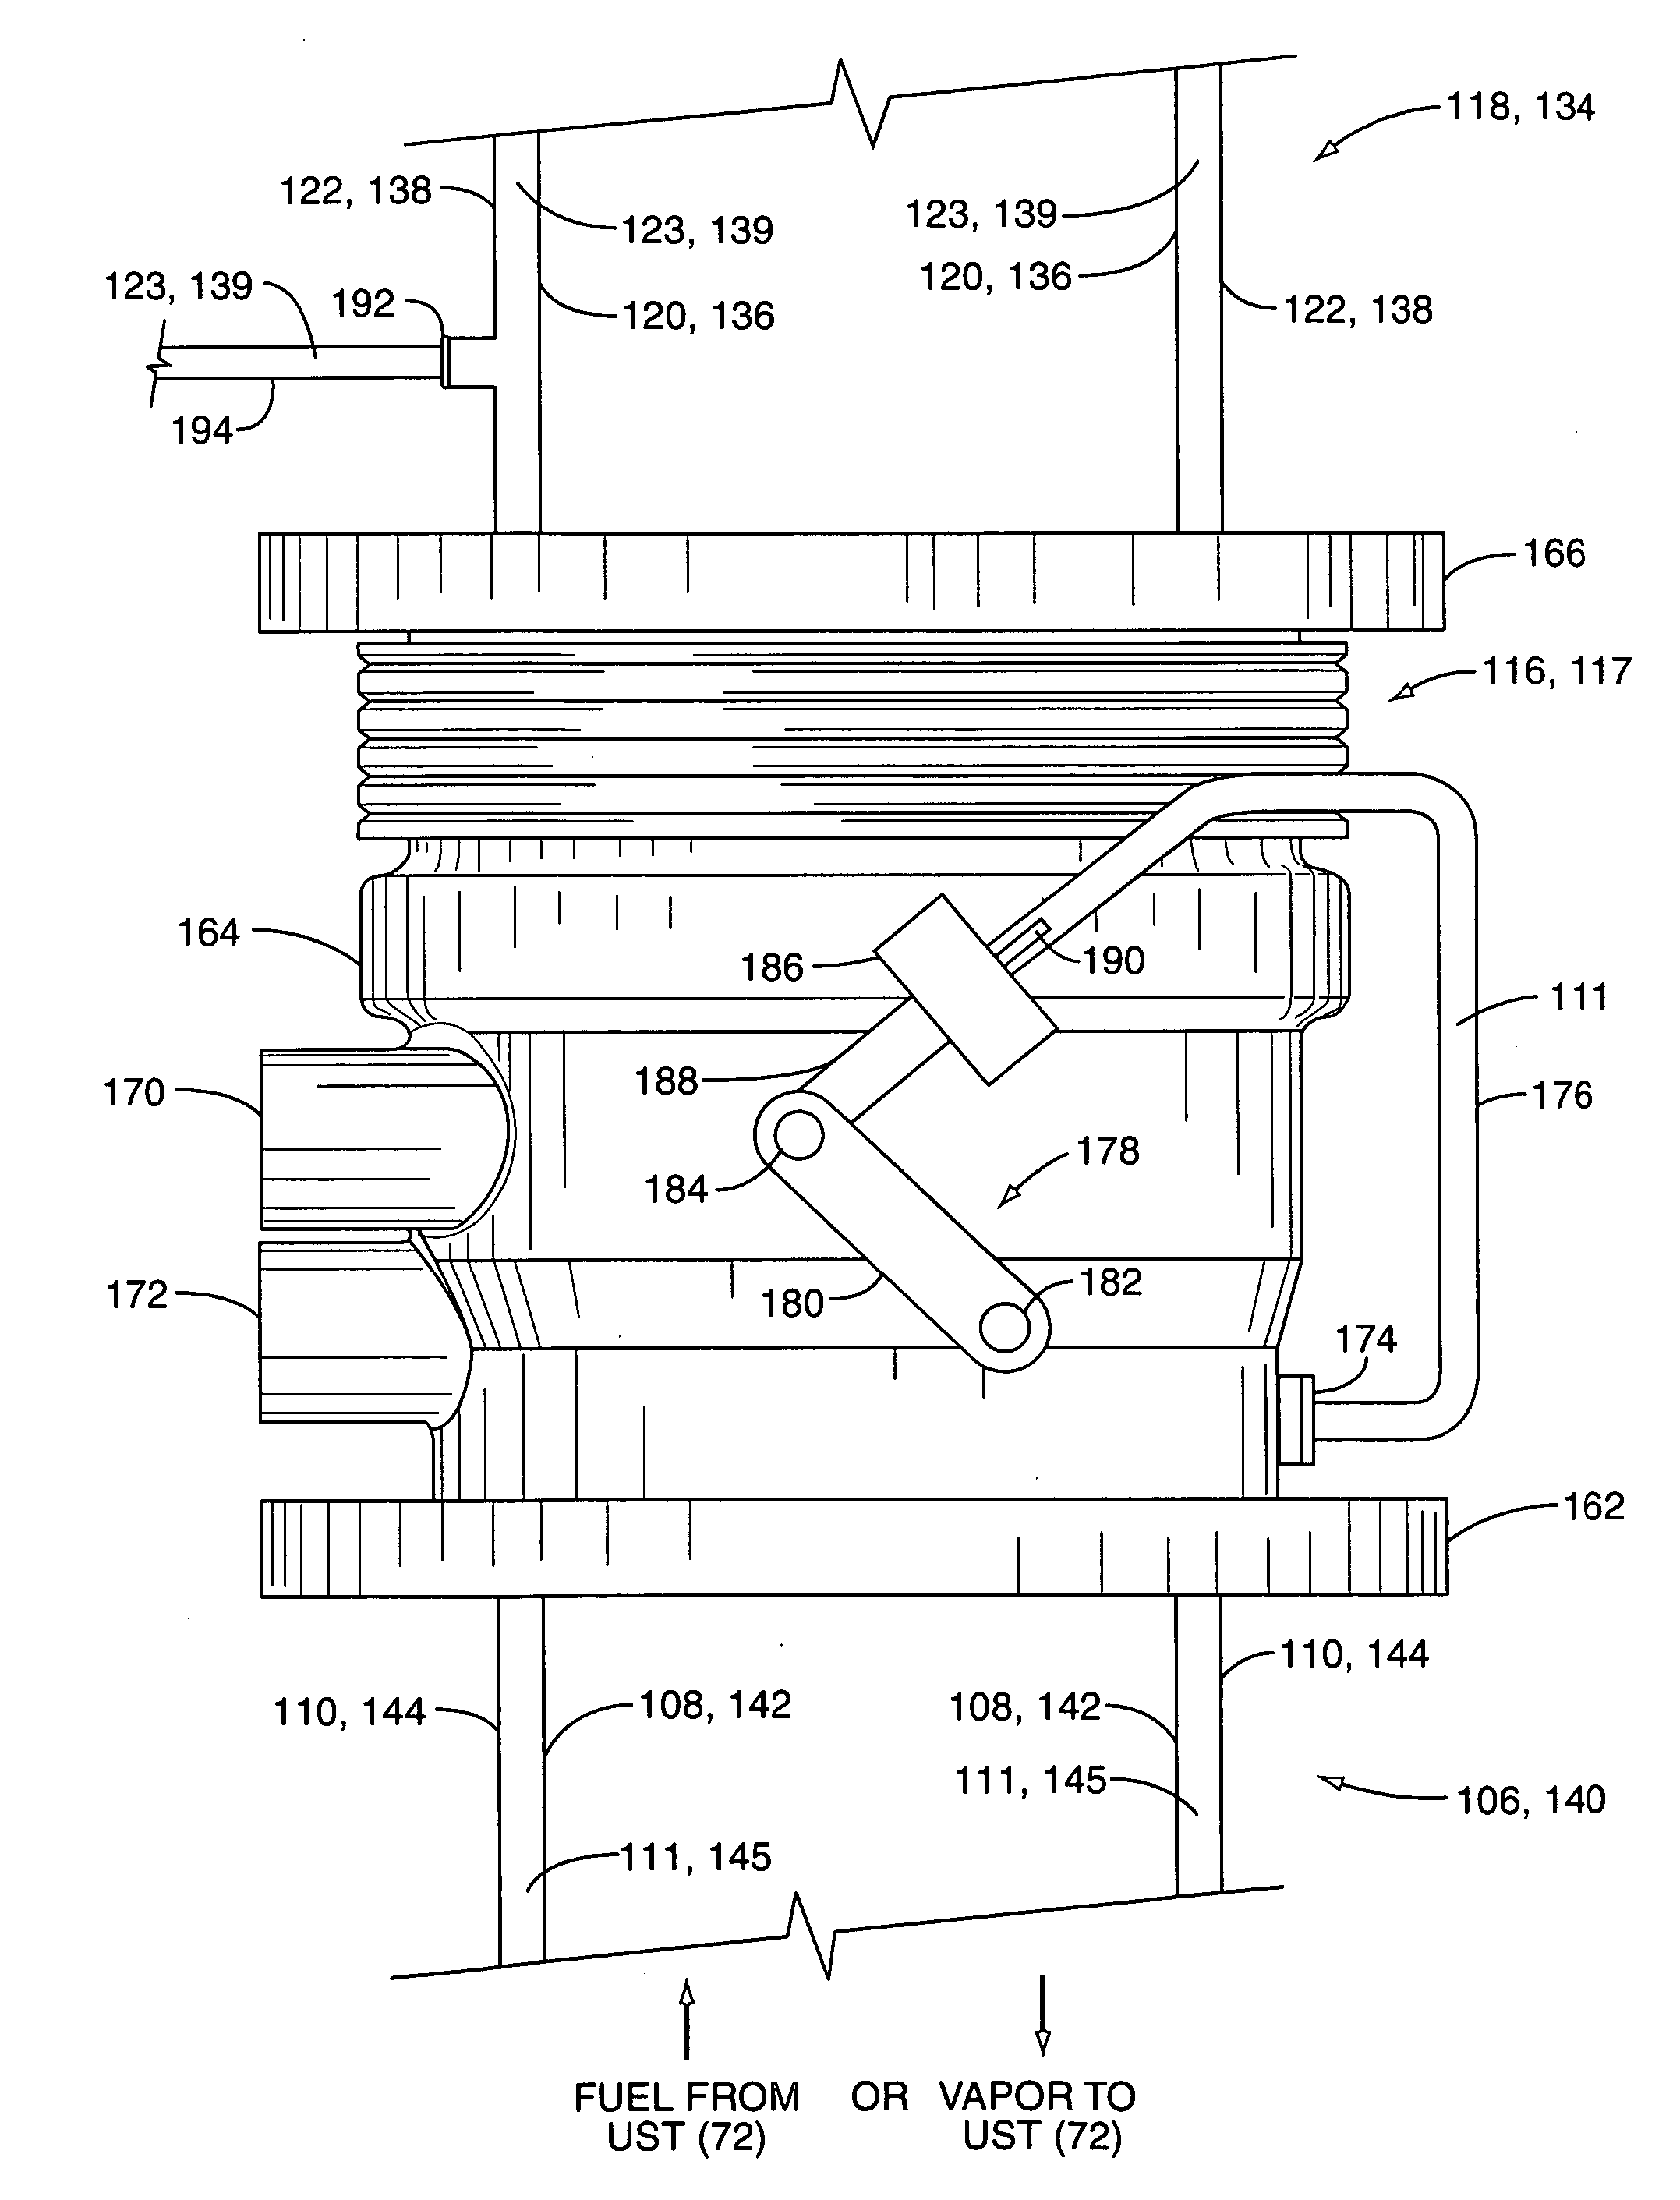 Vacuum-actuated shear valve device, system, and method, particularly for use in service station environments